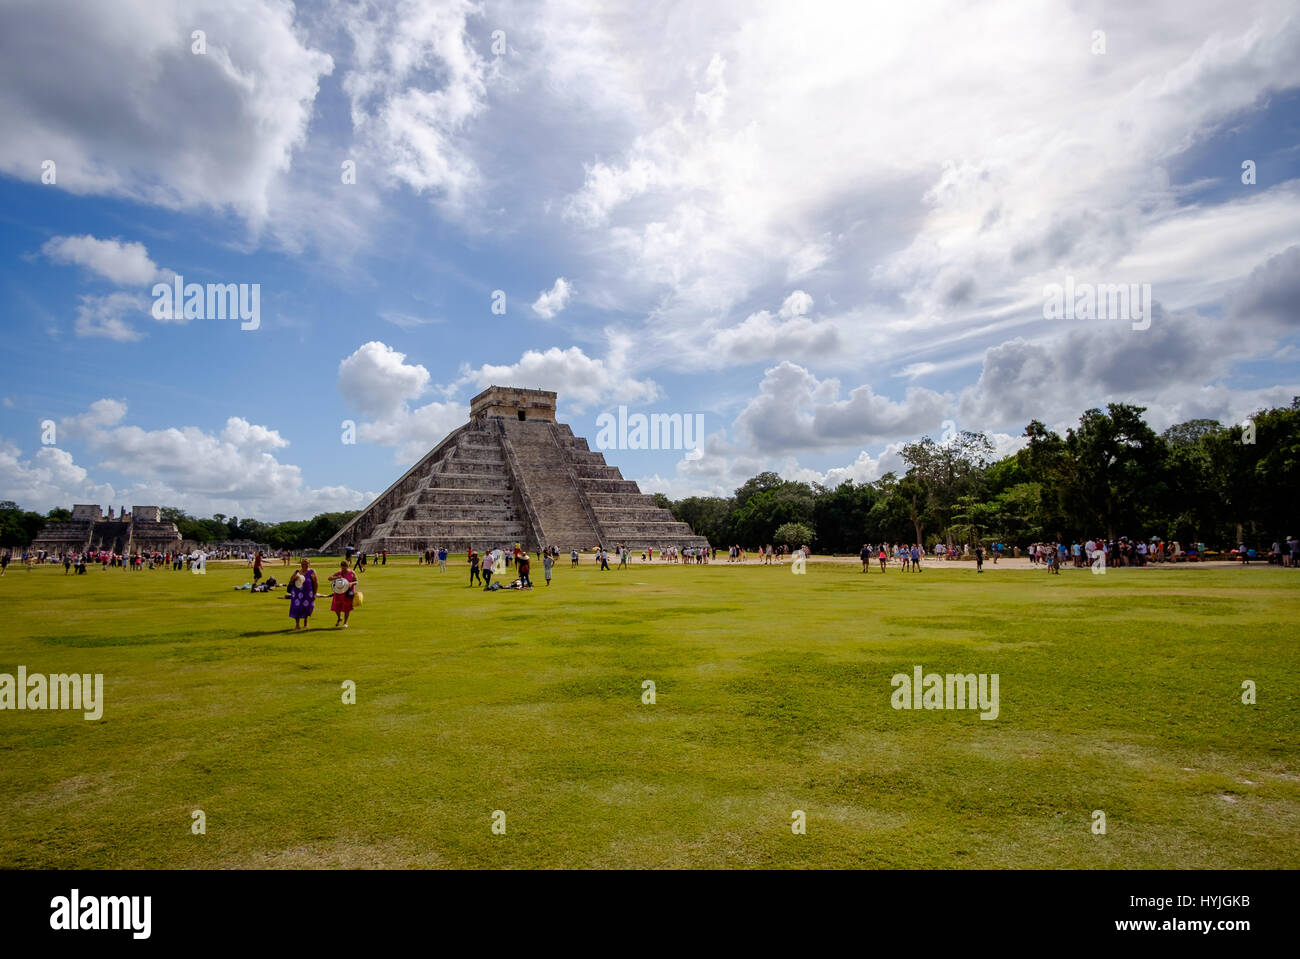 CHICHEN ITZA, MEXICO - 31 DECEMBER 2015: Crowds of people visit Chichen Itza, one of new Seven wonders of the World Stock Photo